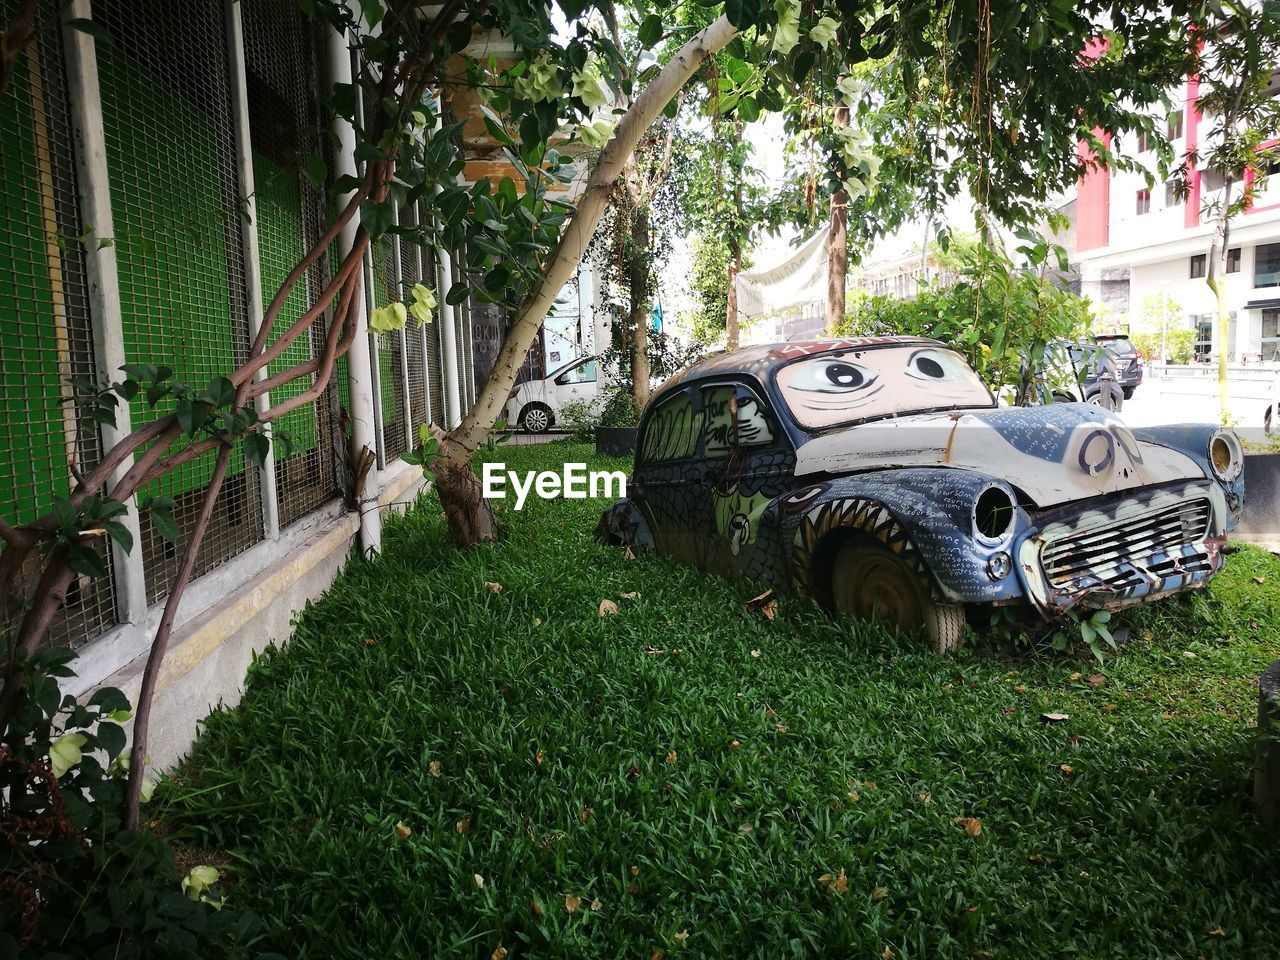 CLOSE-UP OF CAR AND GRASS